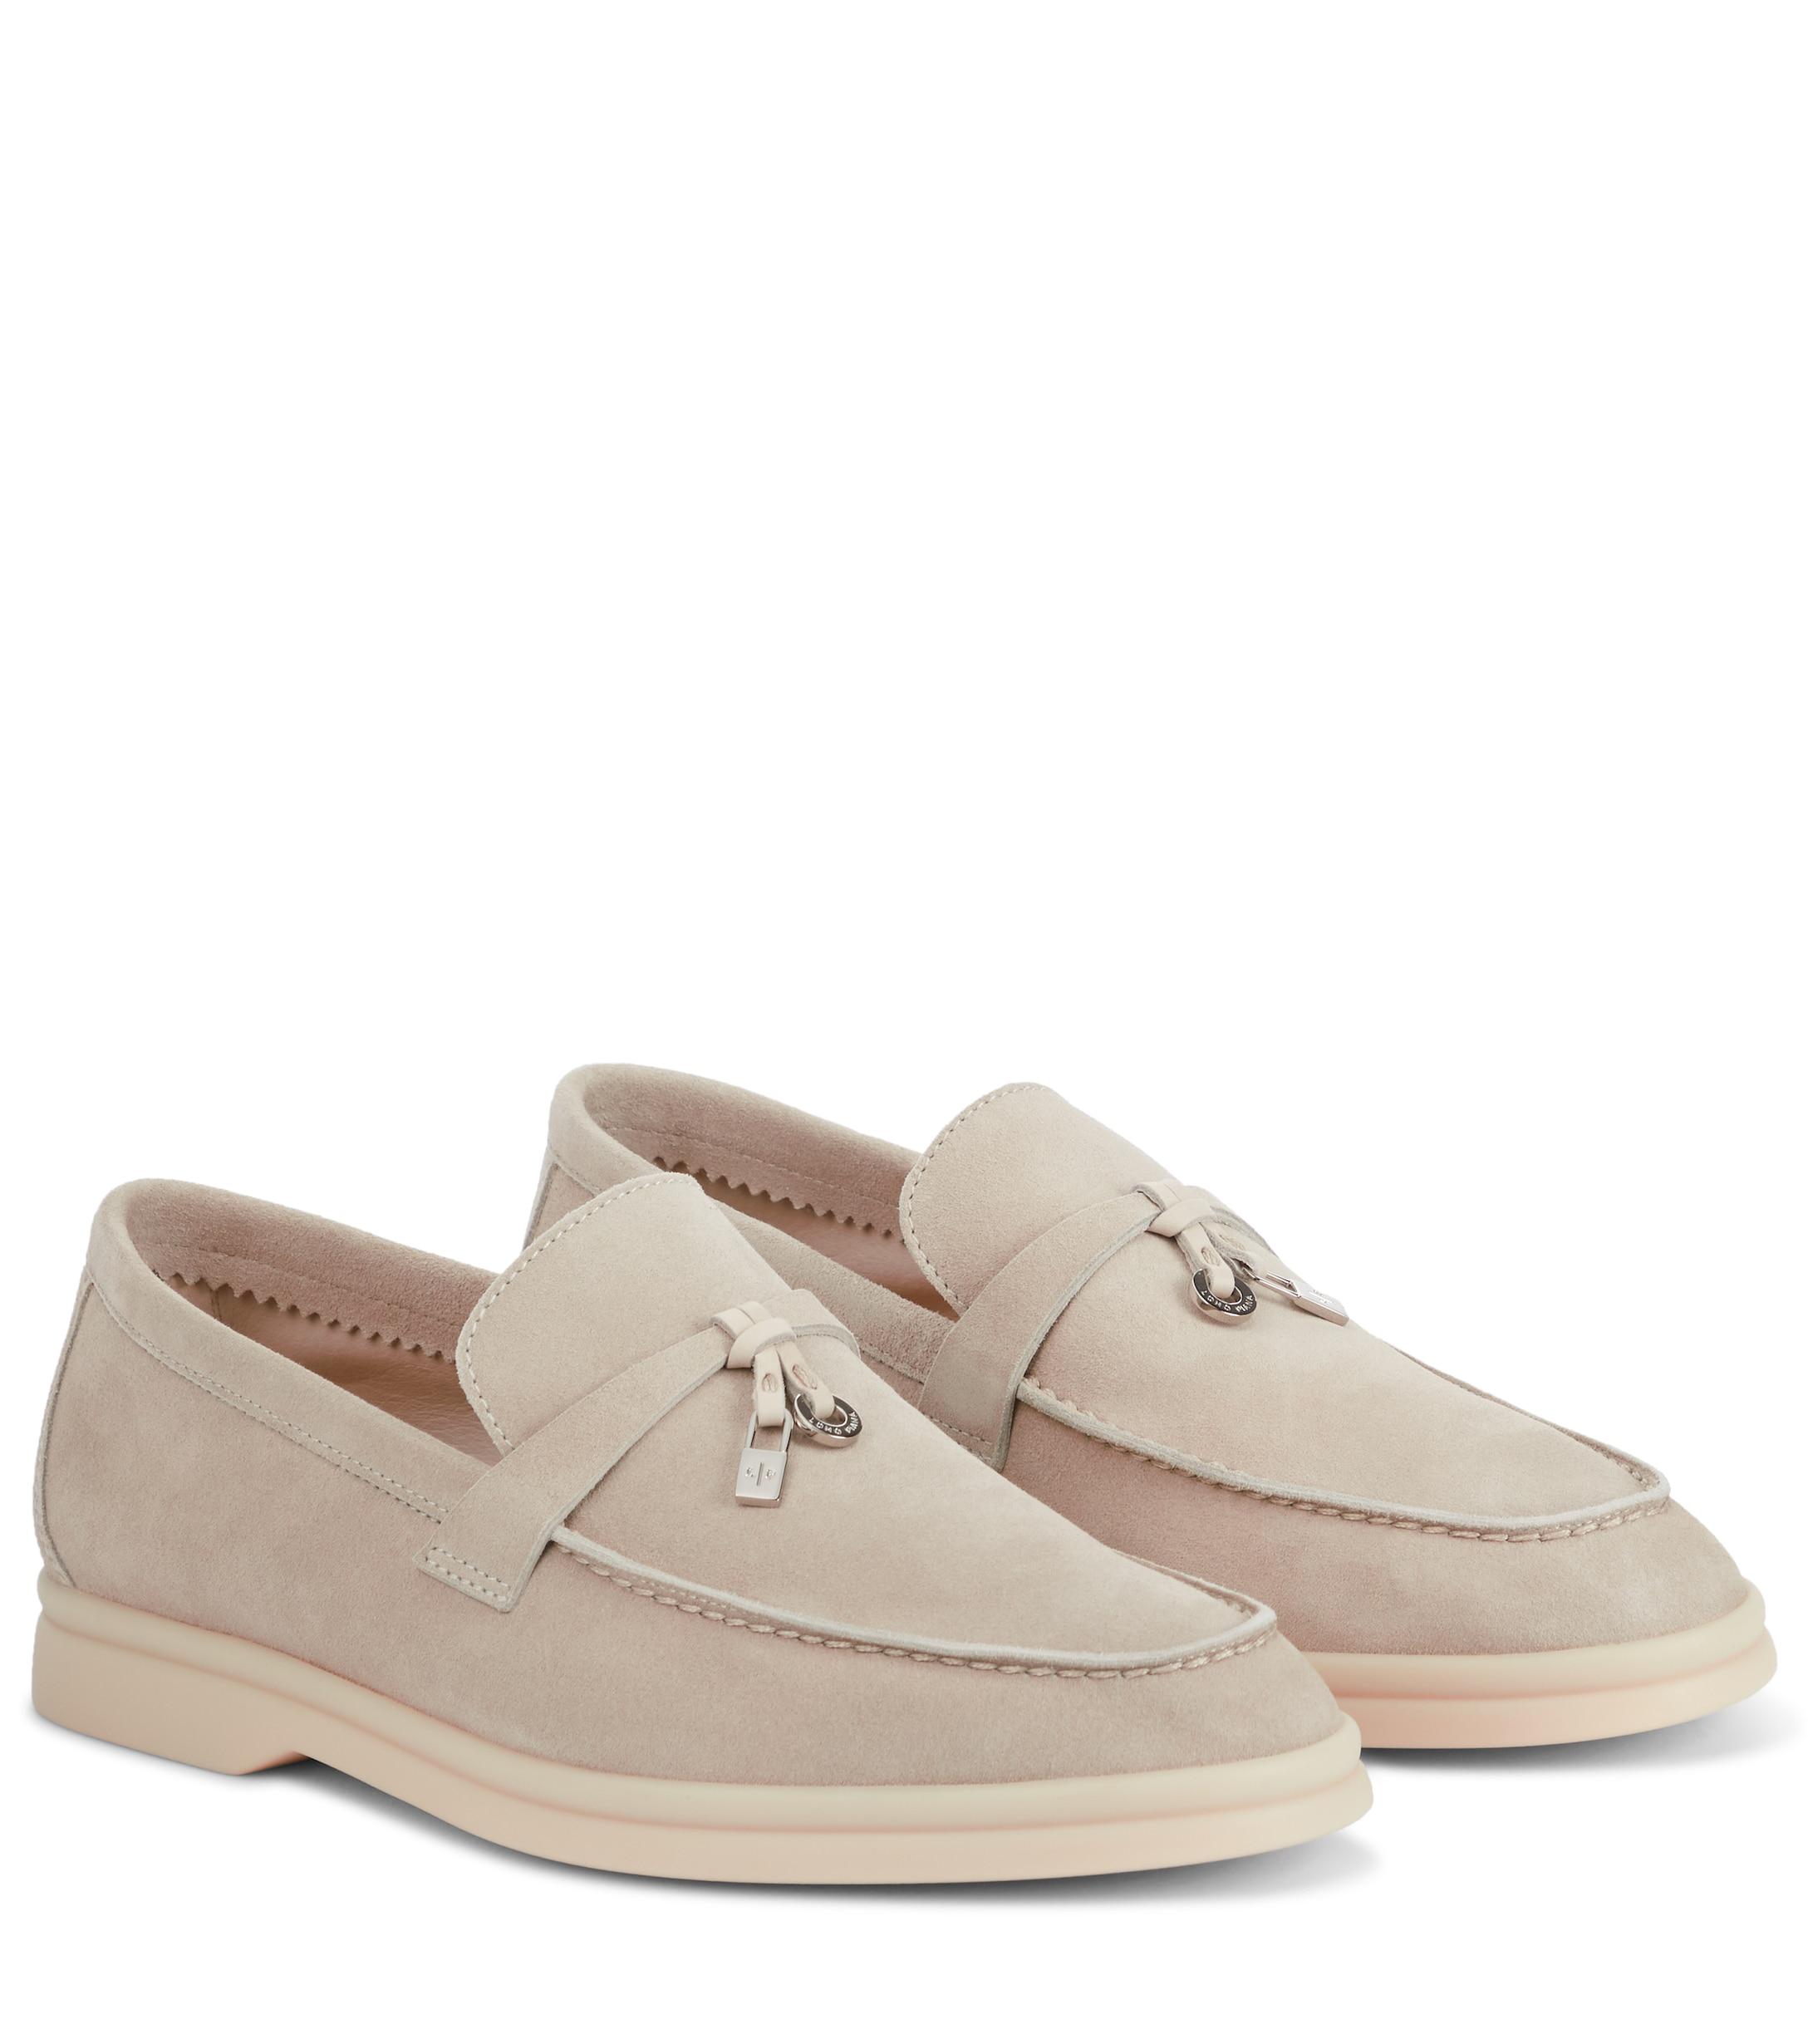 Loro Piana Exclusive To Mytheresa – Summer Charms Walk Loafers in Natural | Lyst